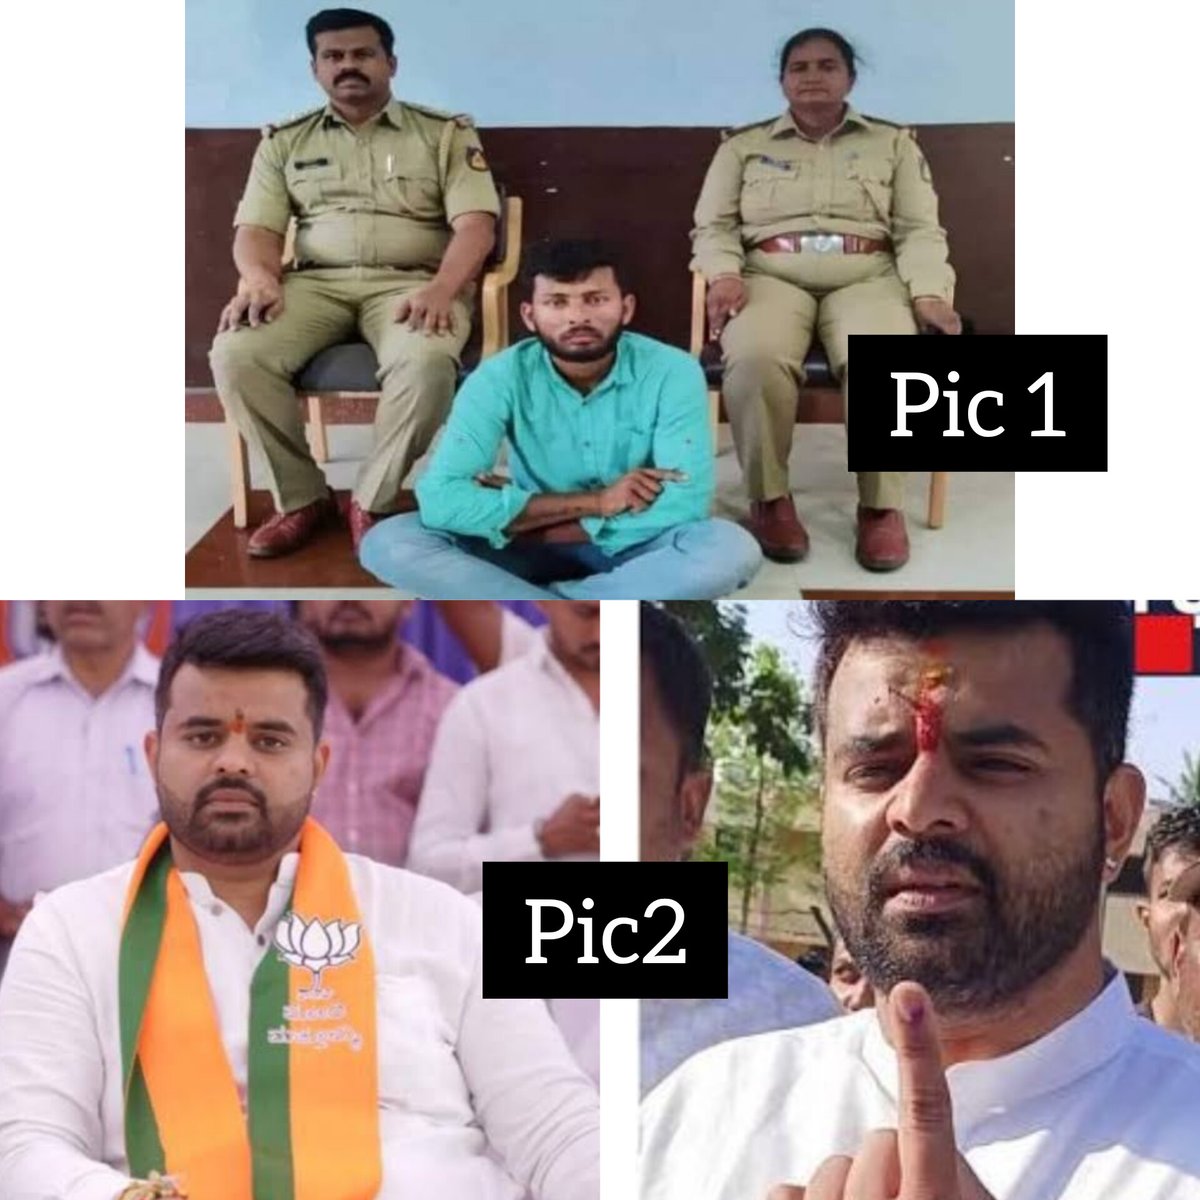 @narendramodi  @hd_kumaraswamy 
Pic1-- the poor guy Deepak just dance on hampi got arrested and sitting under police shoes
Pic2--the rich kid who raped more than 2000 inocent girls contestant in election 2 days back and chilling 
#Democracydied
#NoJusticeInindia
#PrajwalRevanna